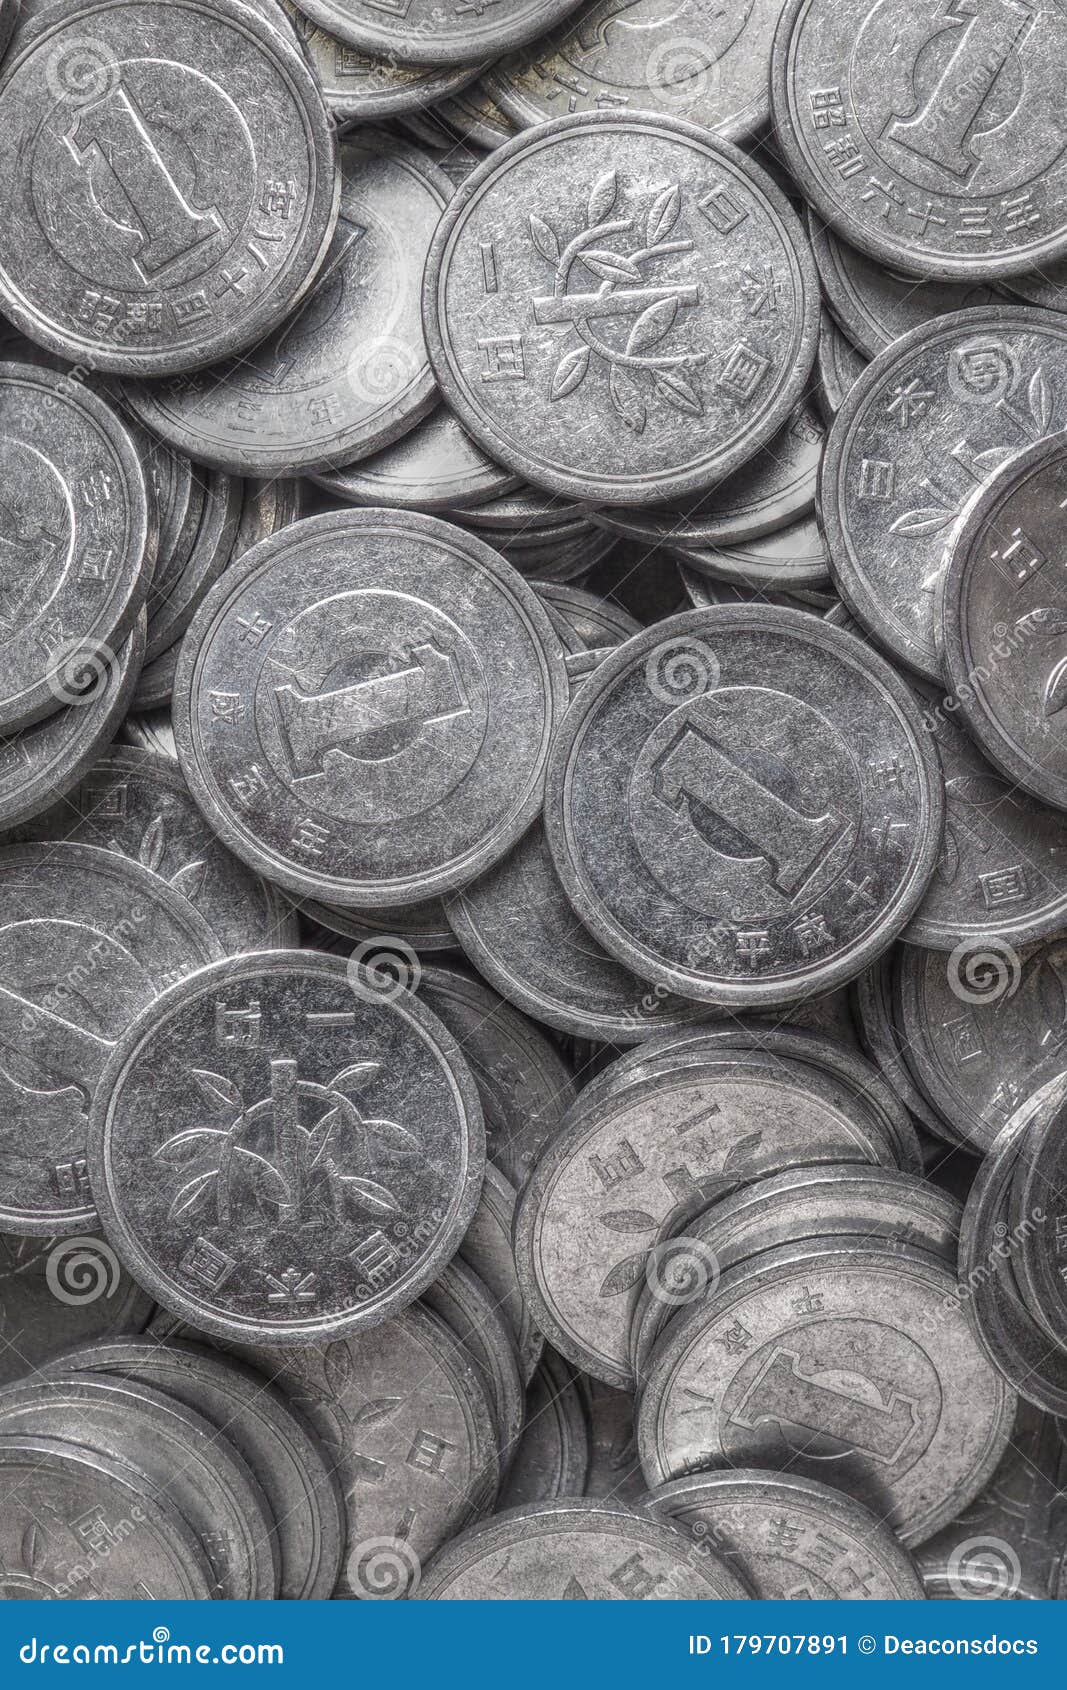 Field Of Japanese Coins At 1 Yen Close Up Dark Background Or Wallpaper With Aged Effect News About The Economy Finance And Stock Image Image Of Japan Bookkeeping